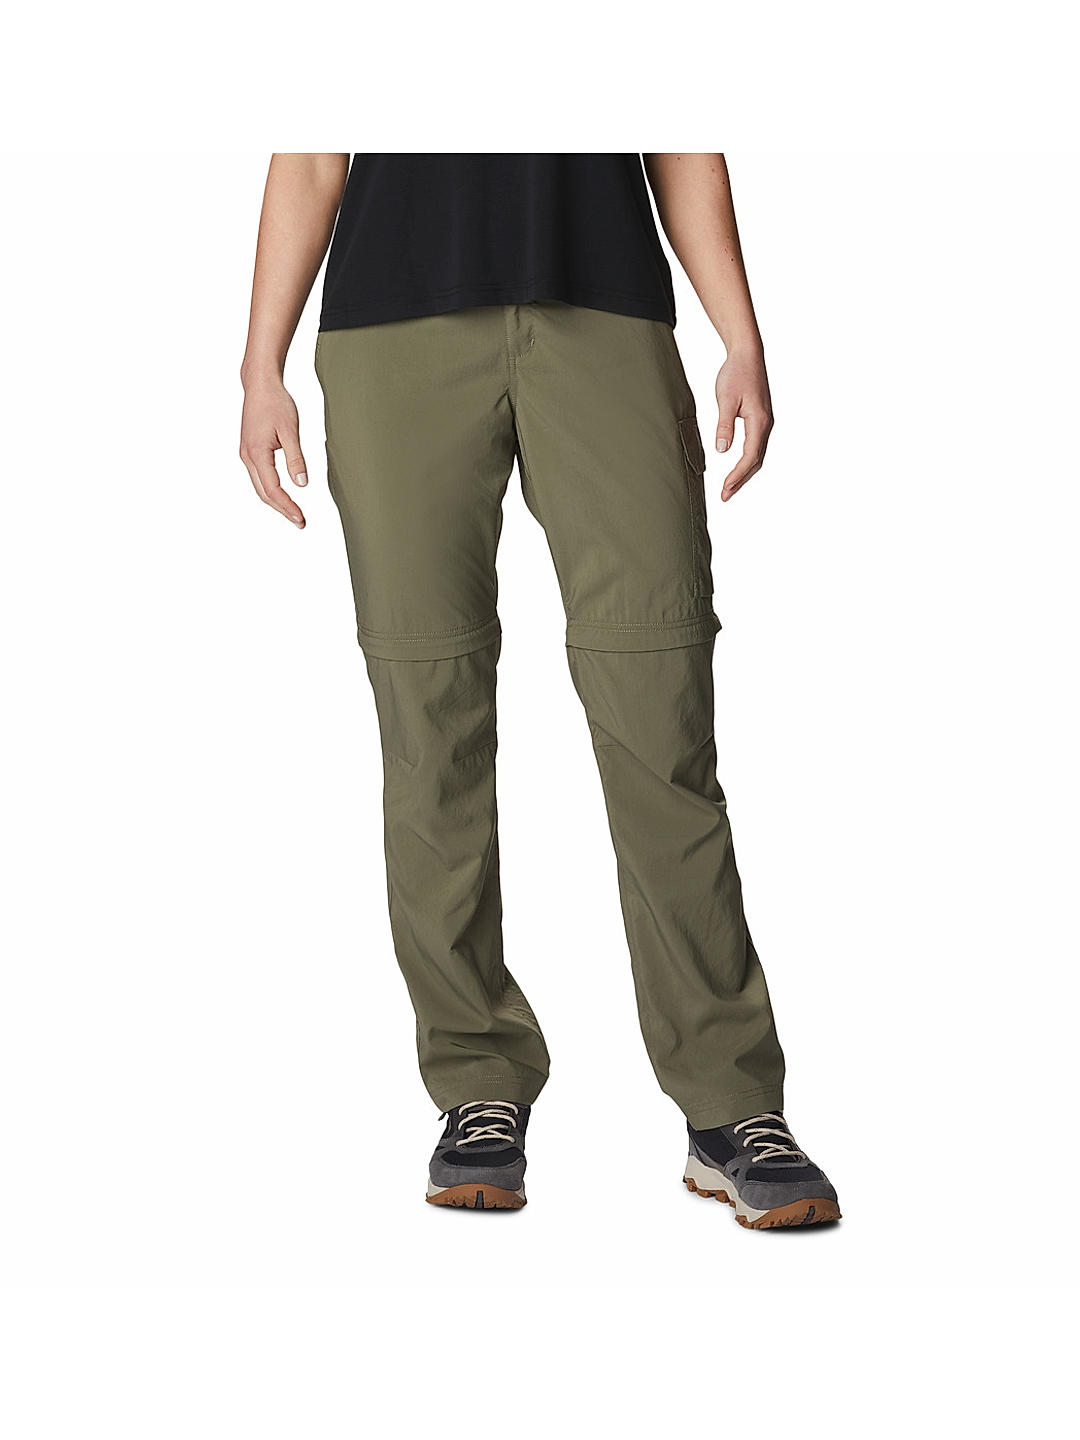 Buy Hiking Pants Online In India - Etsy India